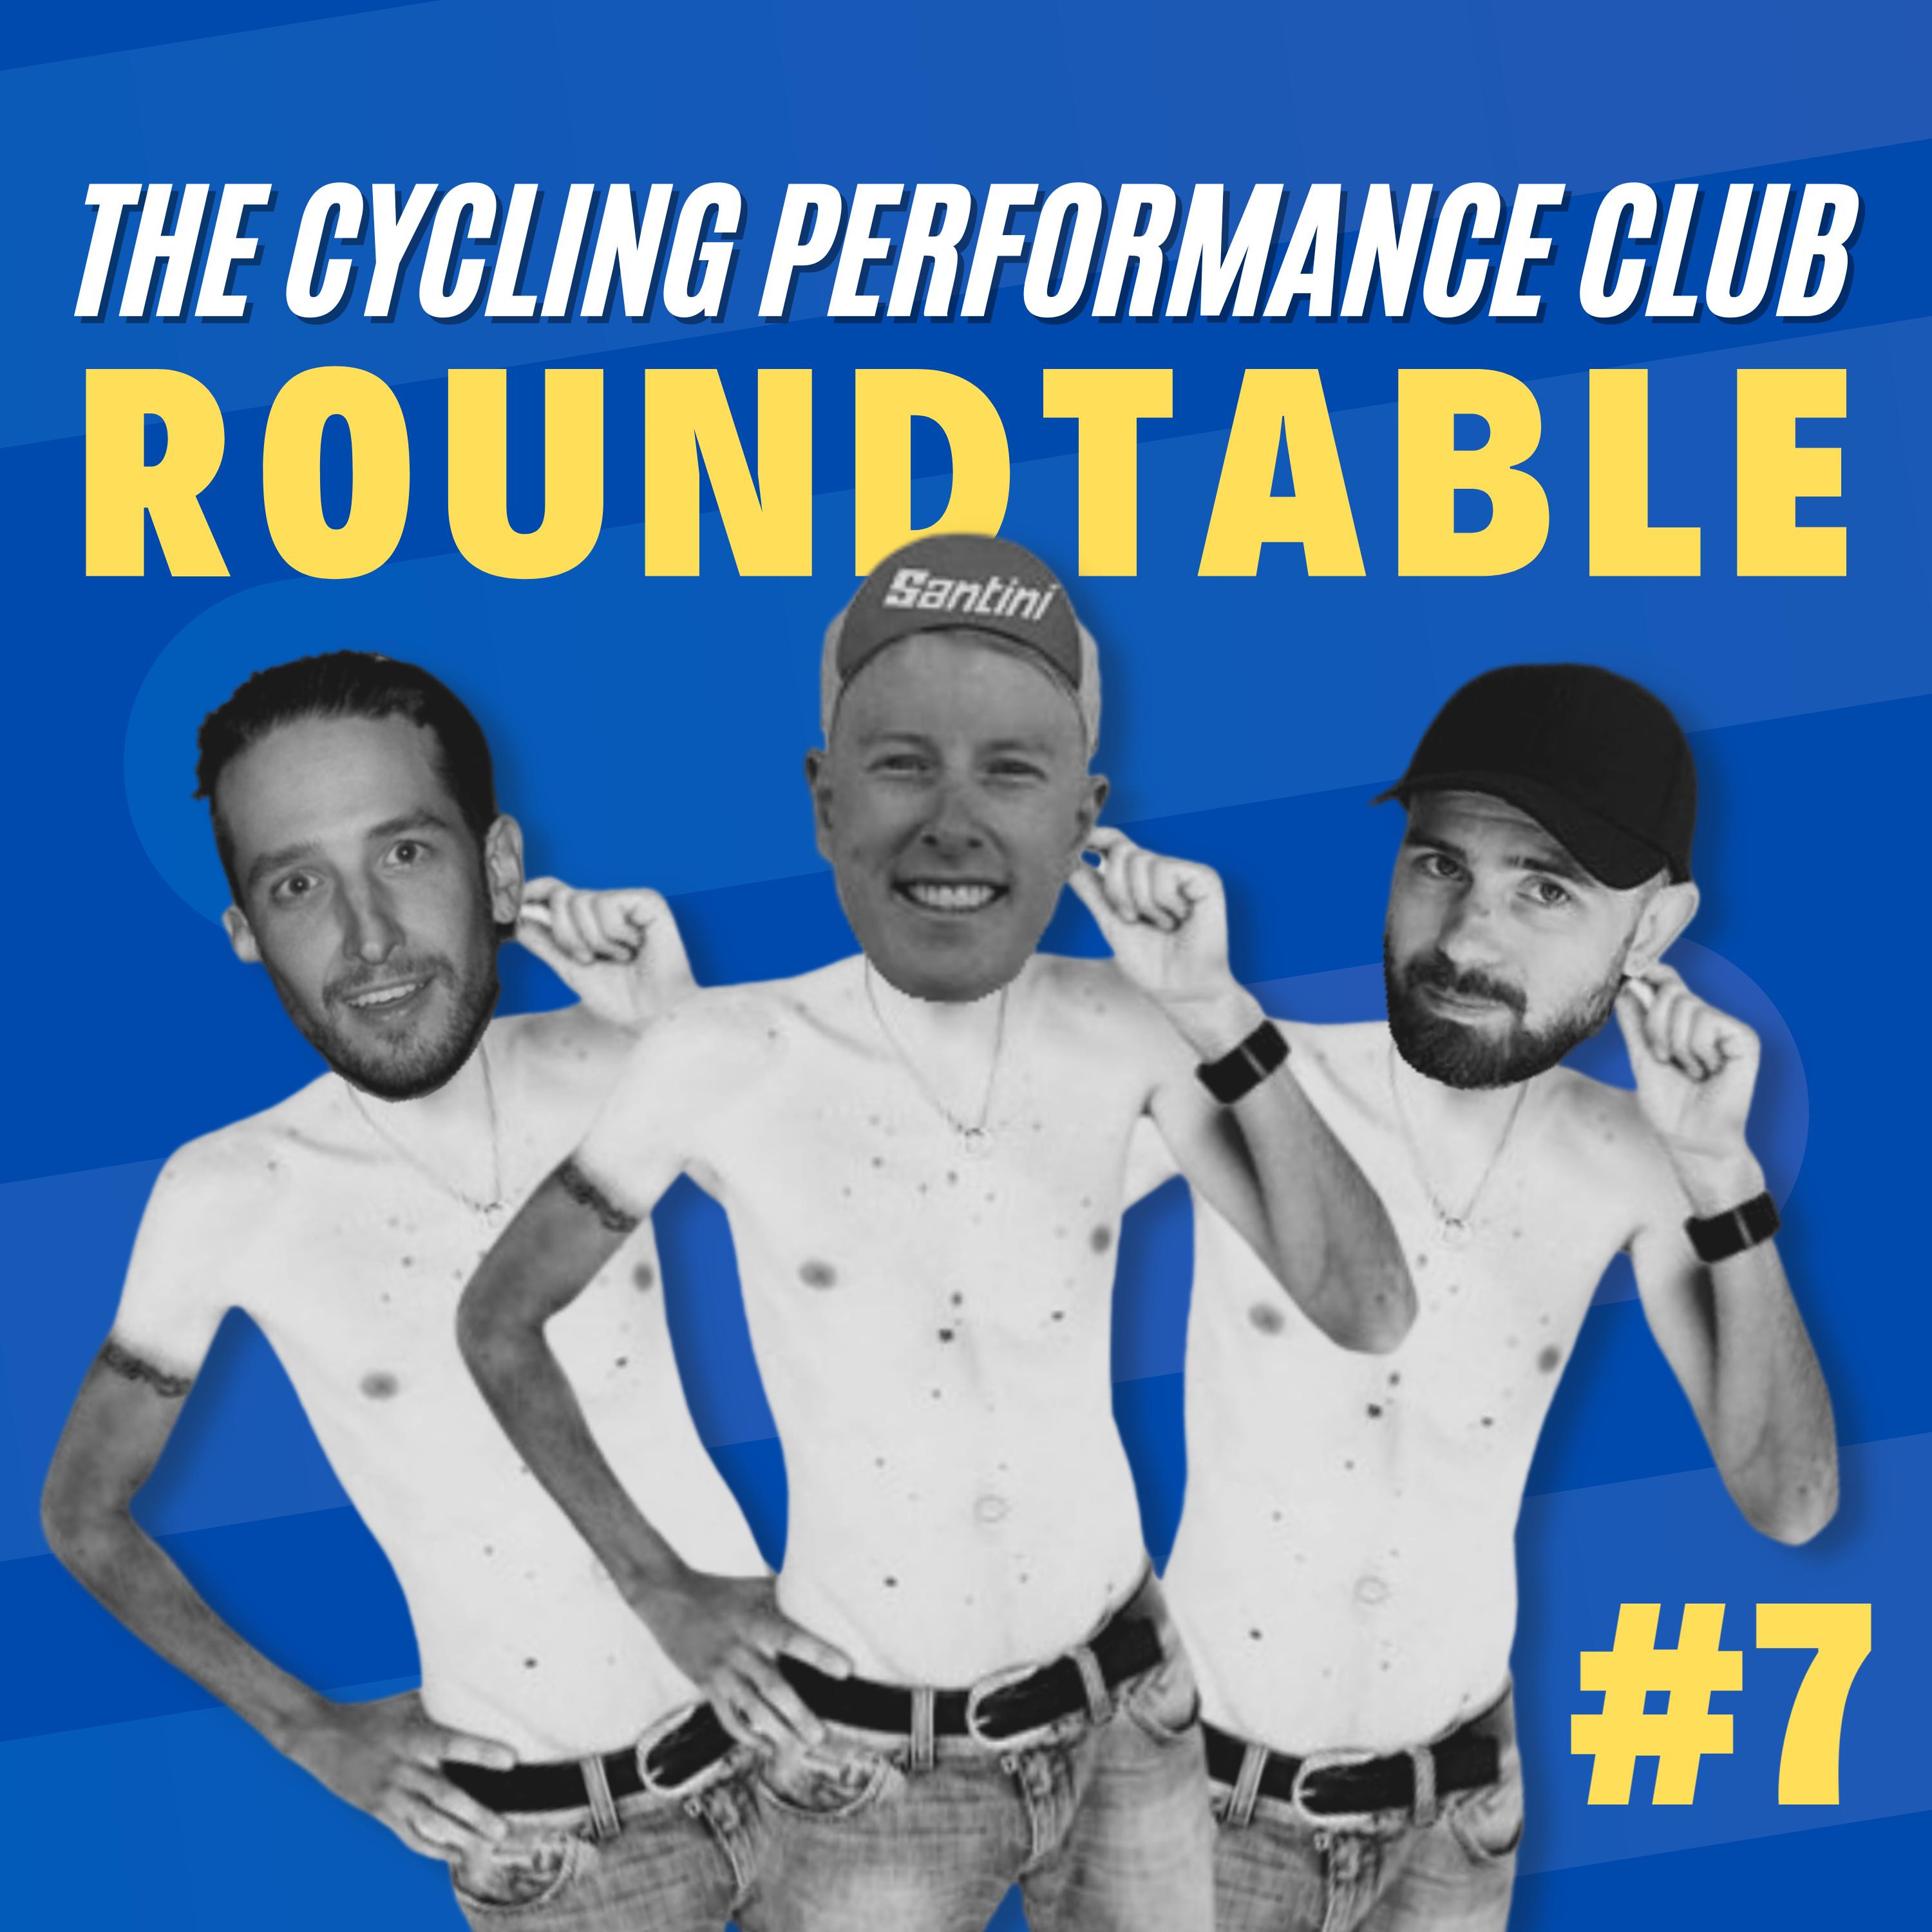 Roundtable #7 - How prevalent is doping in the pro peloton?